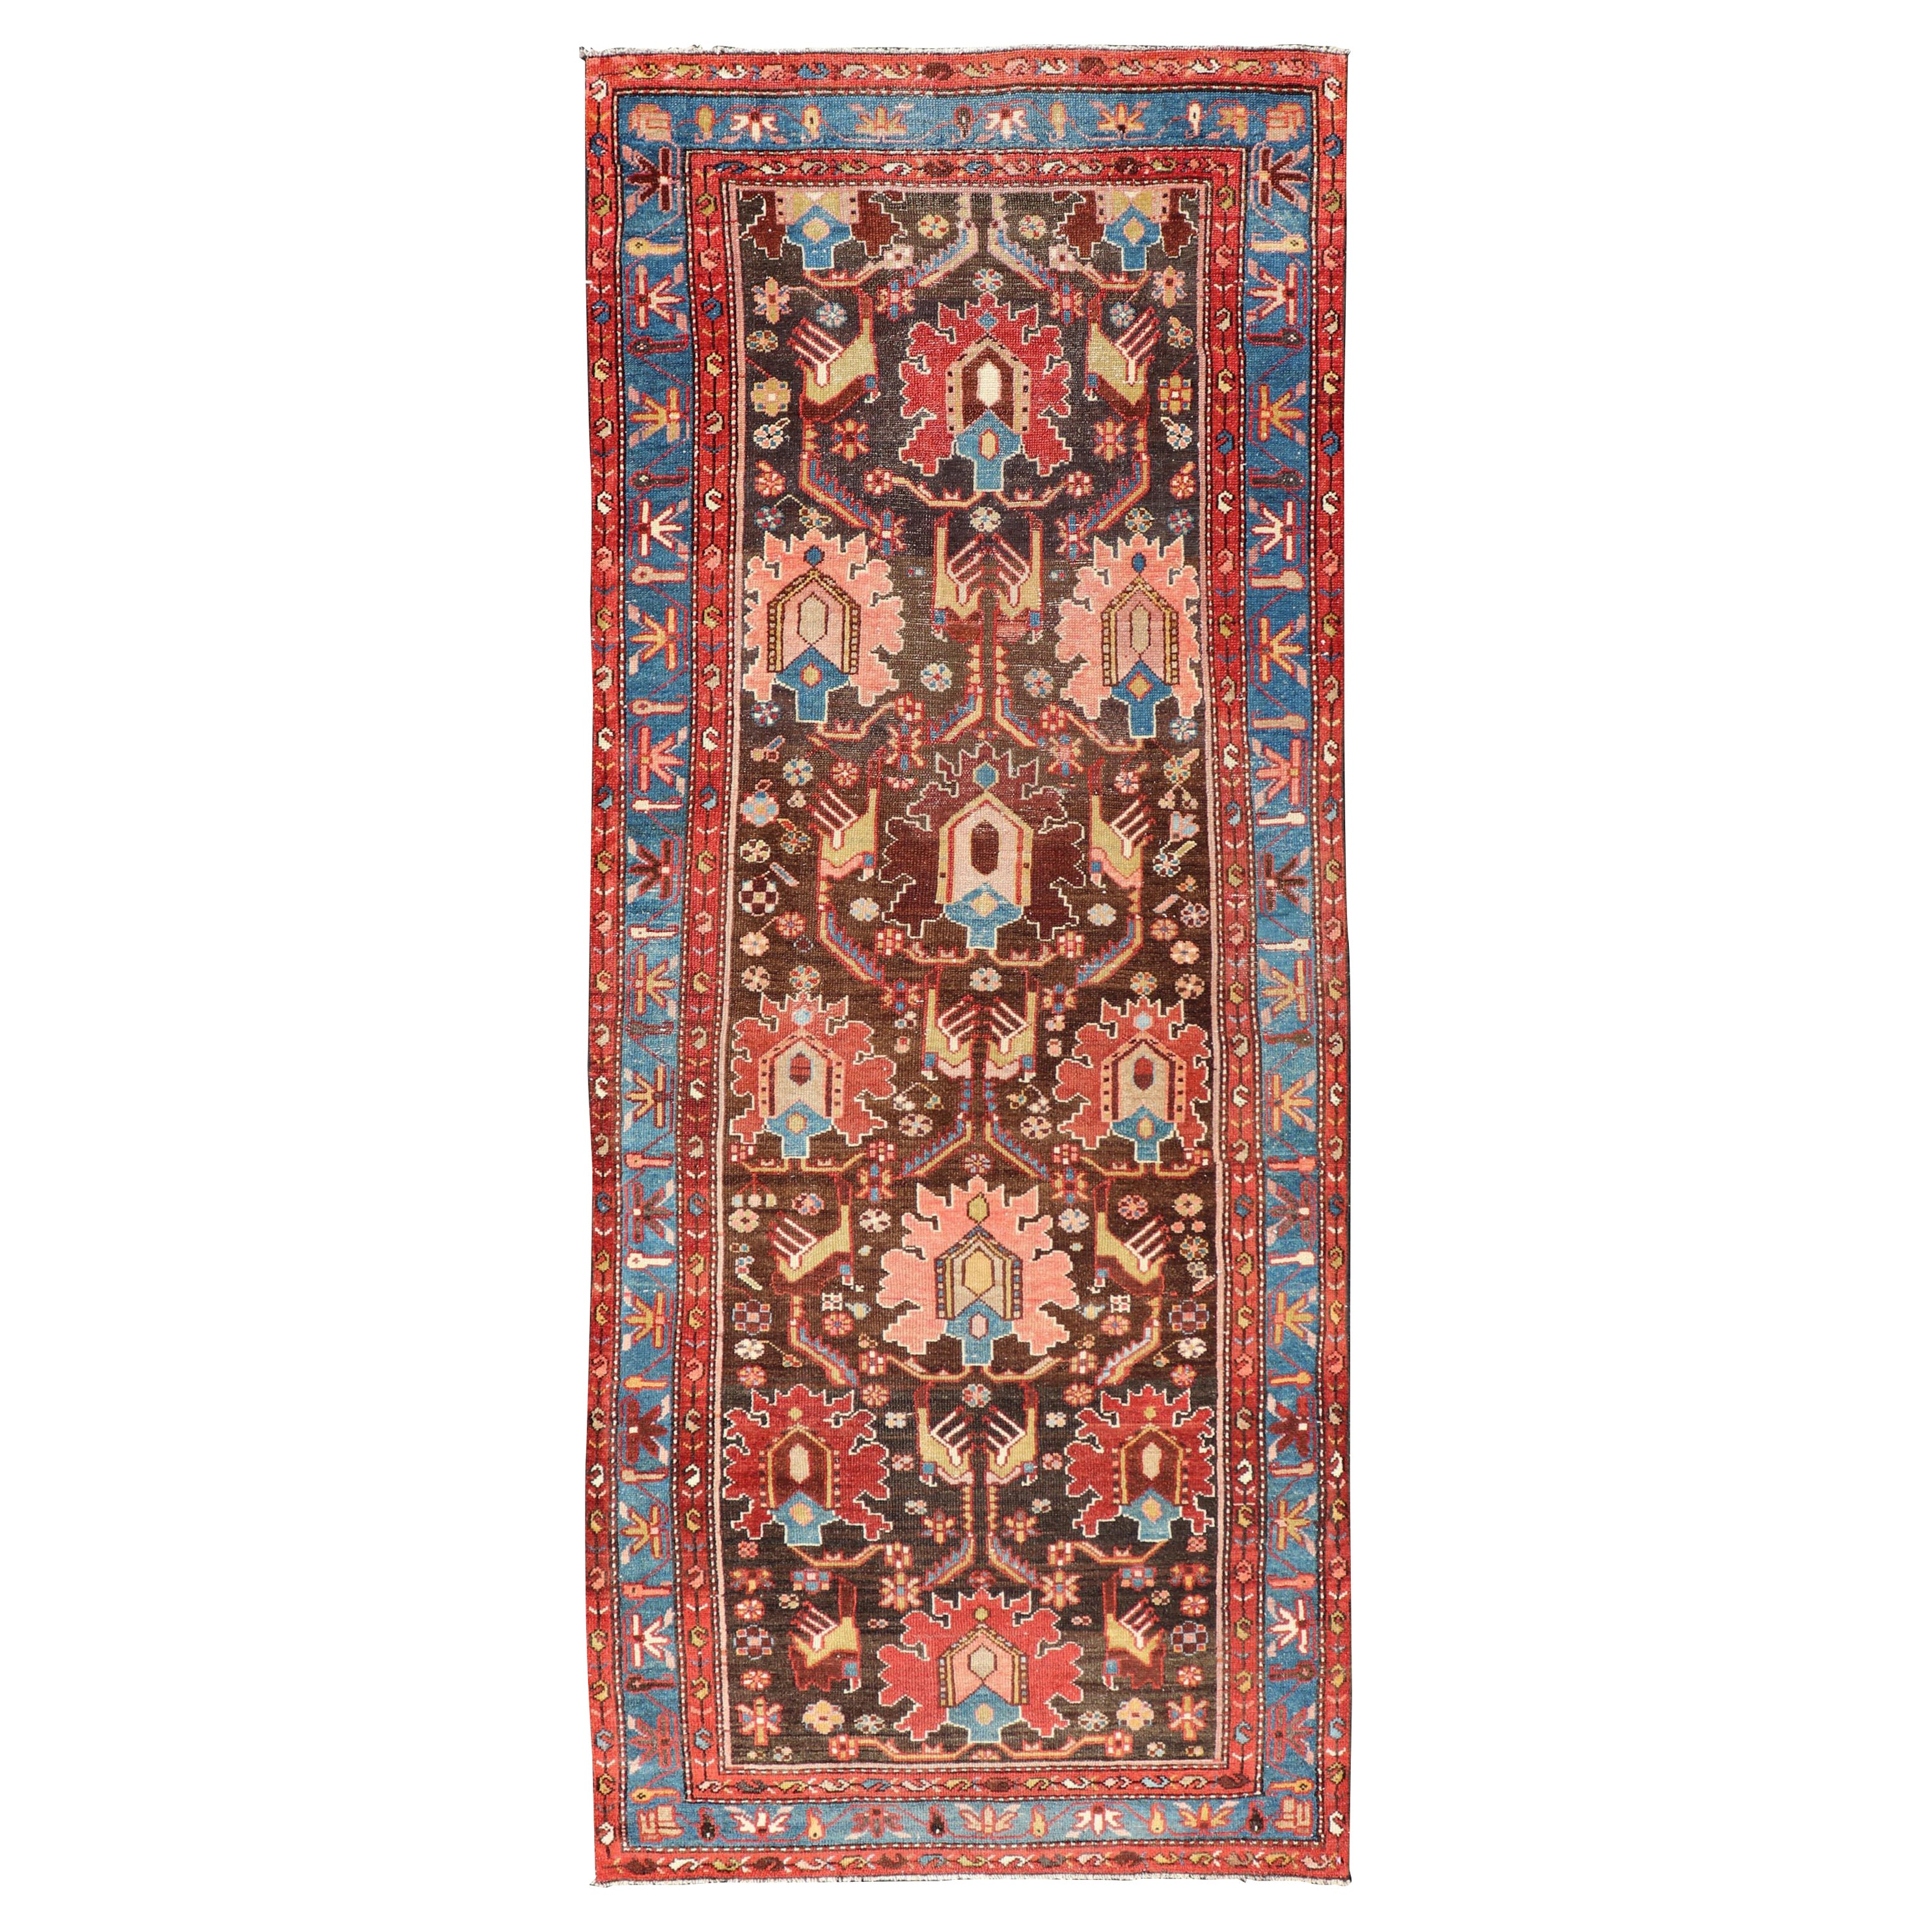 Antique Persian Tribal Designed Hamadan in Multi-Tiered Border in Brown and Blue